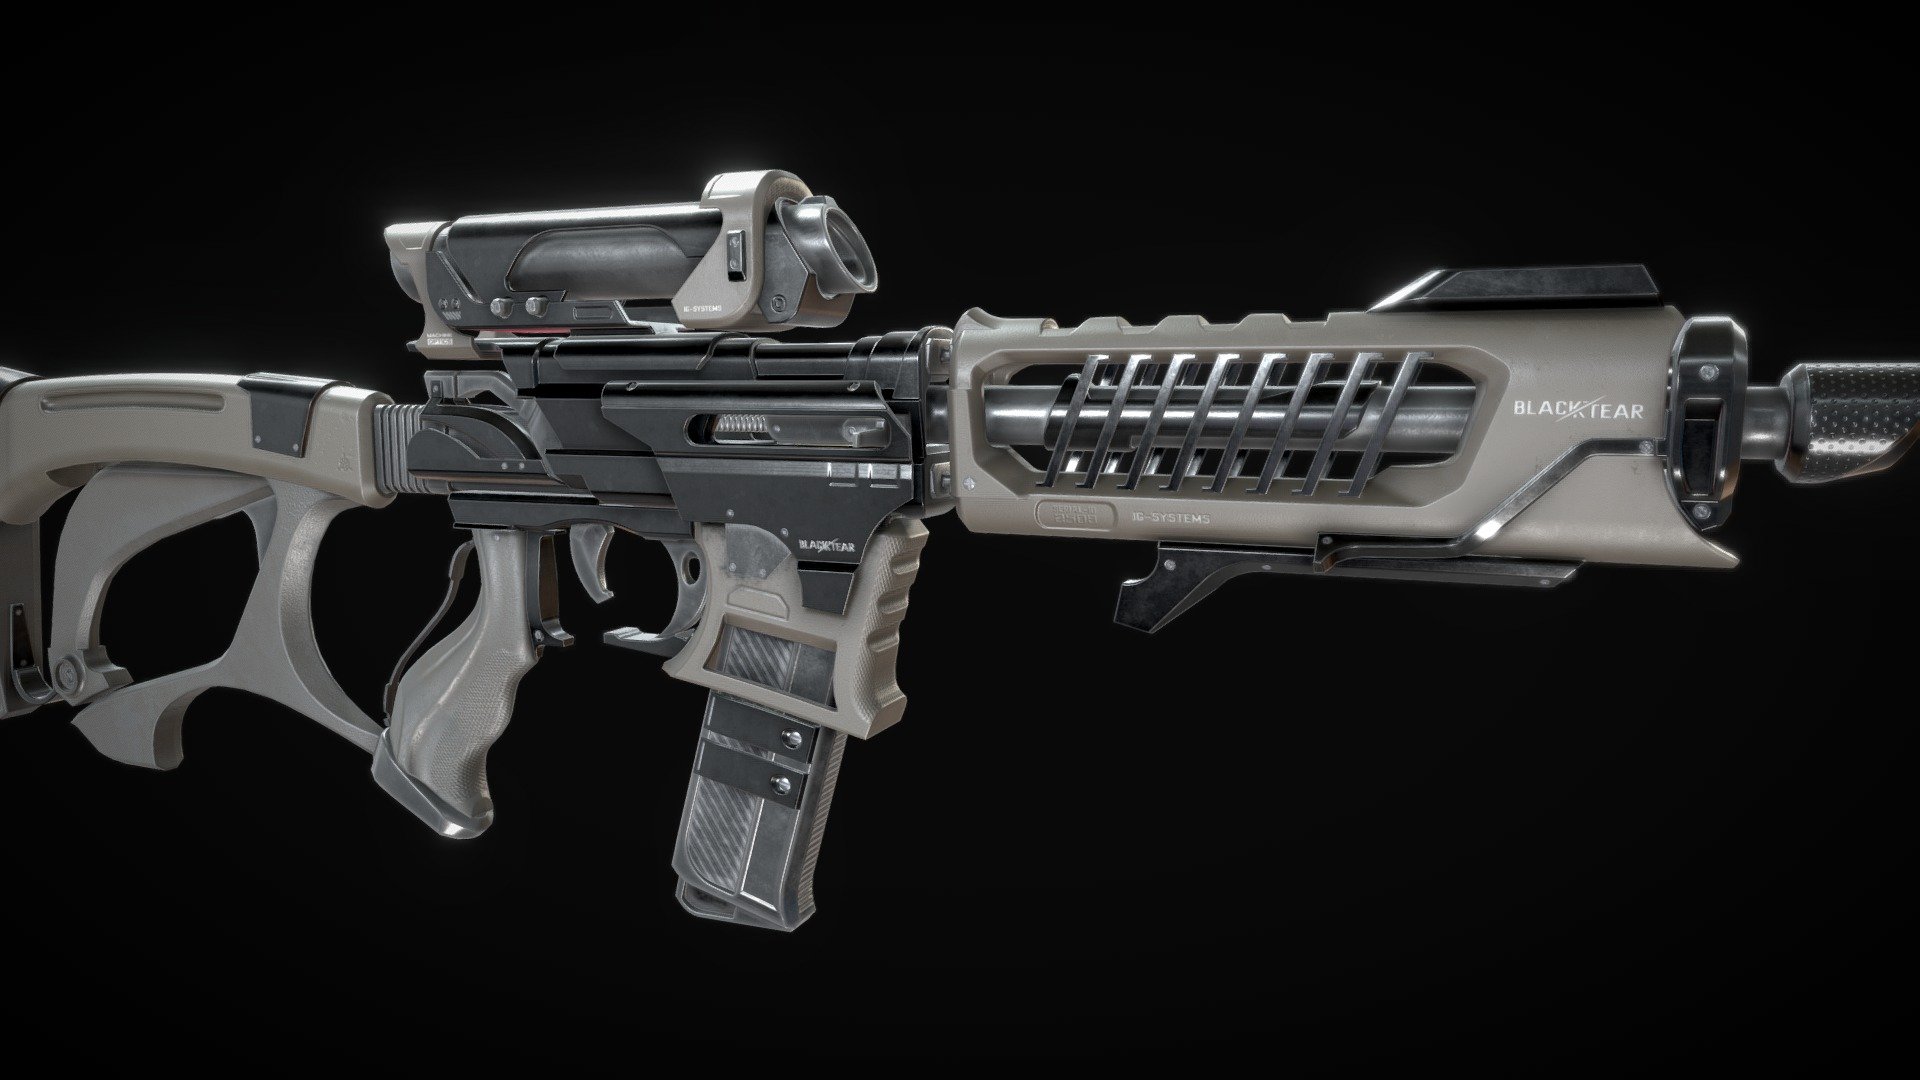 Game ready model with 4K and 2K textures, low vertex count, rig and basic animations.

Blend file included

Detailed low-poly model of an Assault Rifle, perfect for use in medium-distance rendering and video games.
Includes separated animations for shooting and reloading.

If you require different resolutions or texture presets, please send me an email, and I'll be happy to assist you for free 3d model